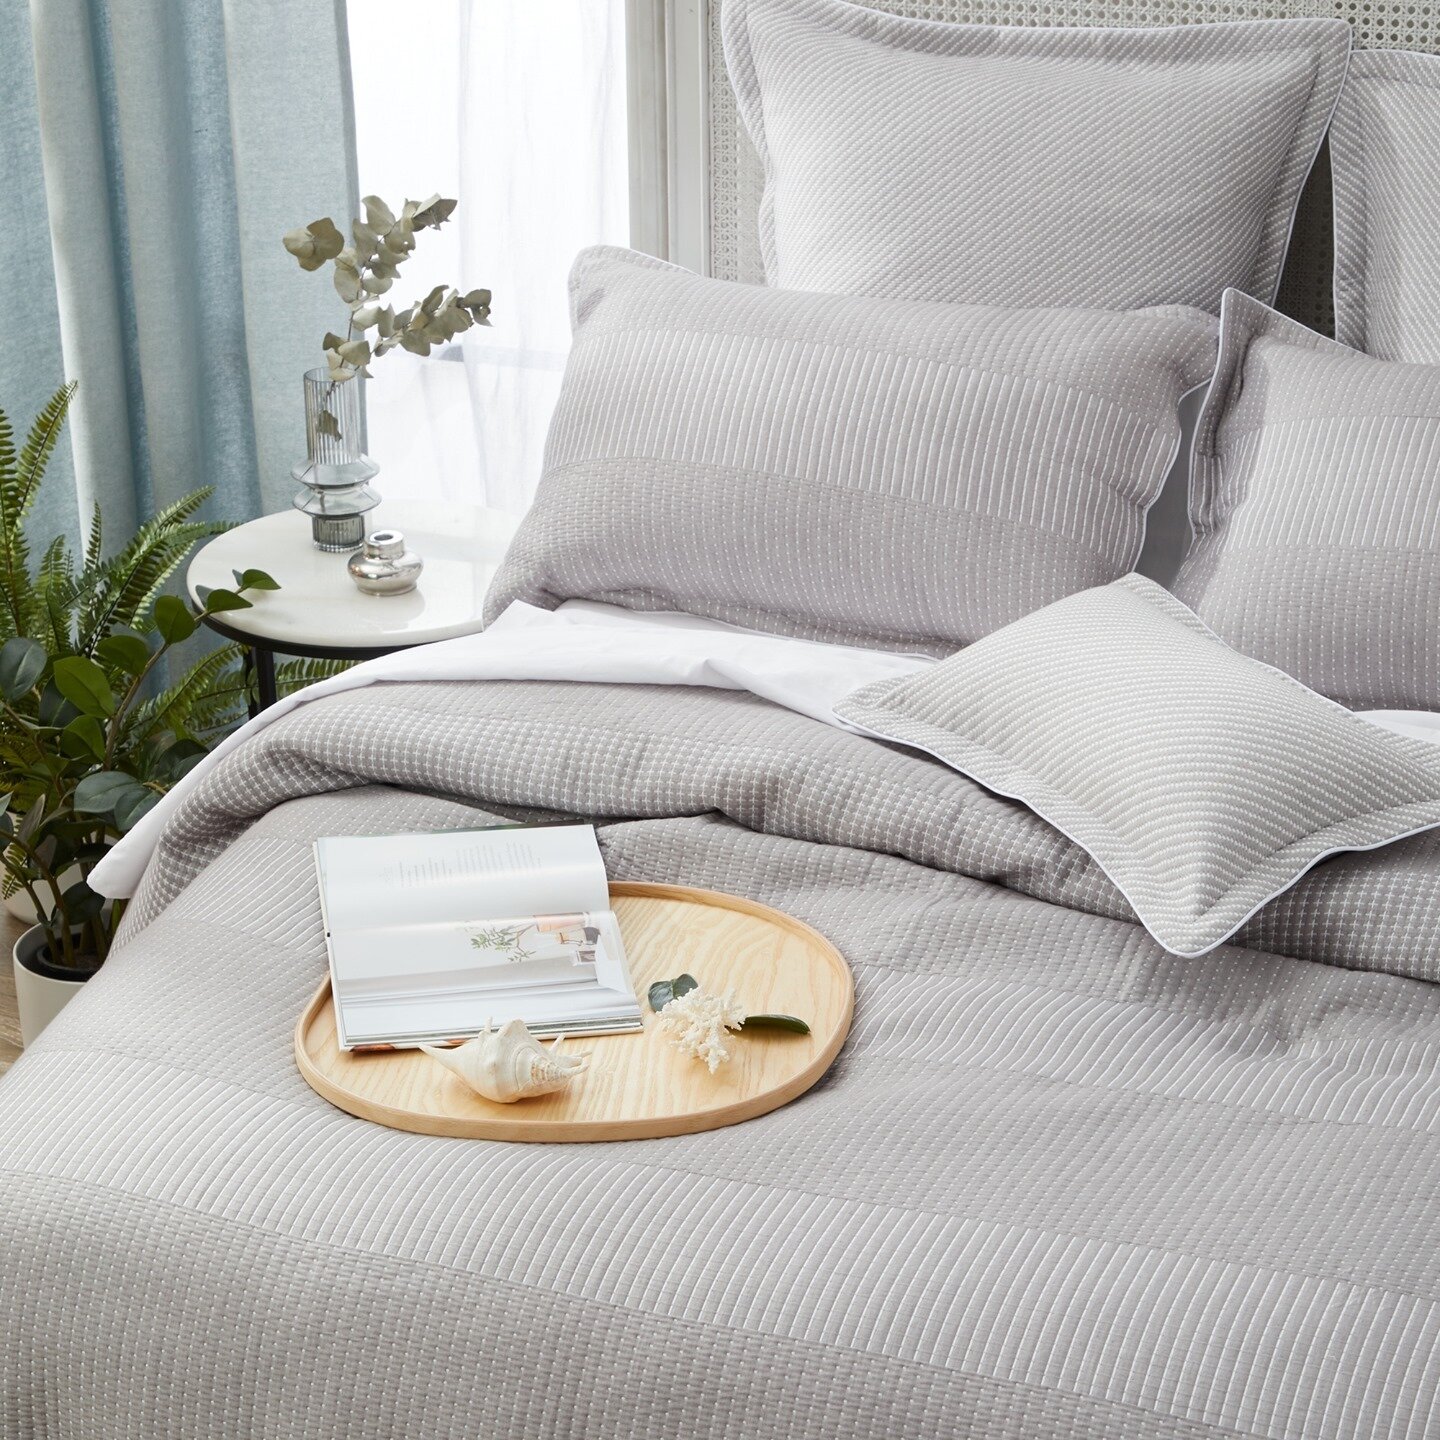 Did you know? ⁠
⁠
Traditionally, a bed would have two Euro pillows, followed by two standards and a feature breakfast rectangle, square, or round cushion. ⁠
⁠
We love this classic styling of Tier Silver, available soon from our new collection 🤍 ⁠